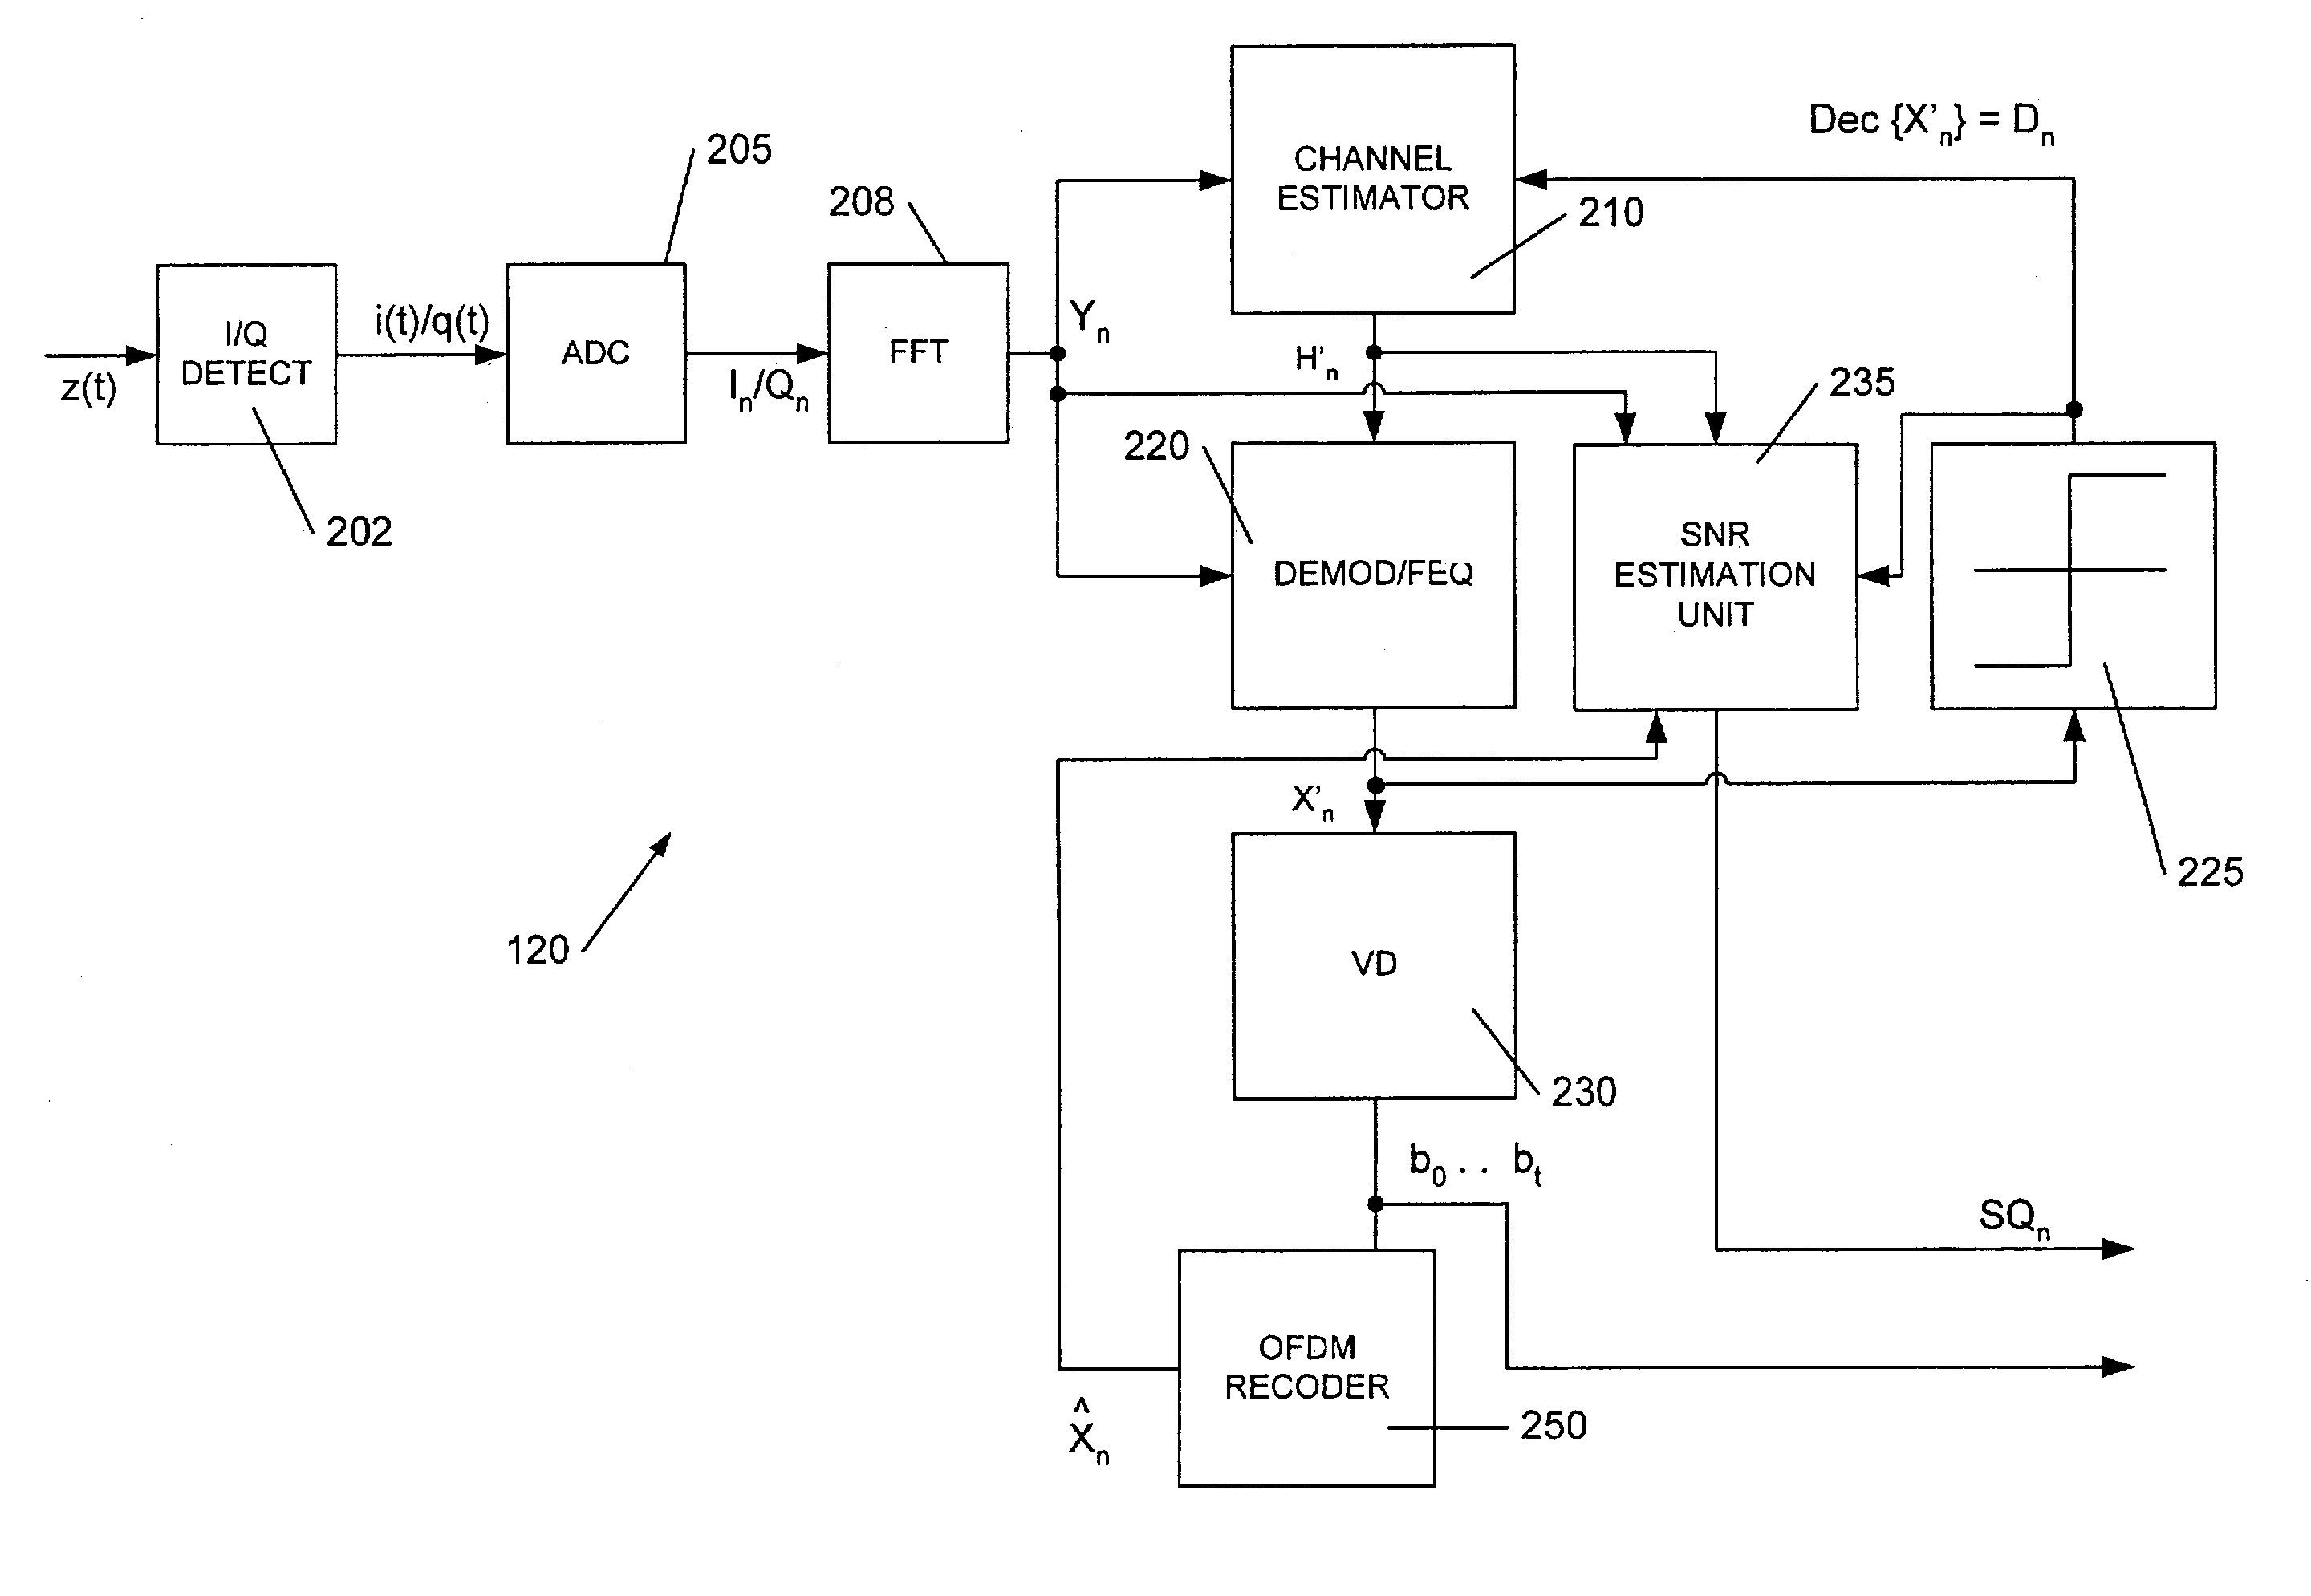 Apparatus and method for measuring signal quality of a wireless communications link